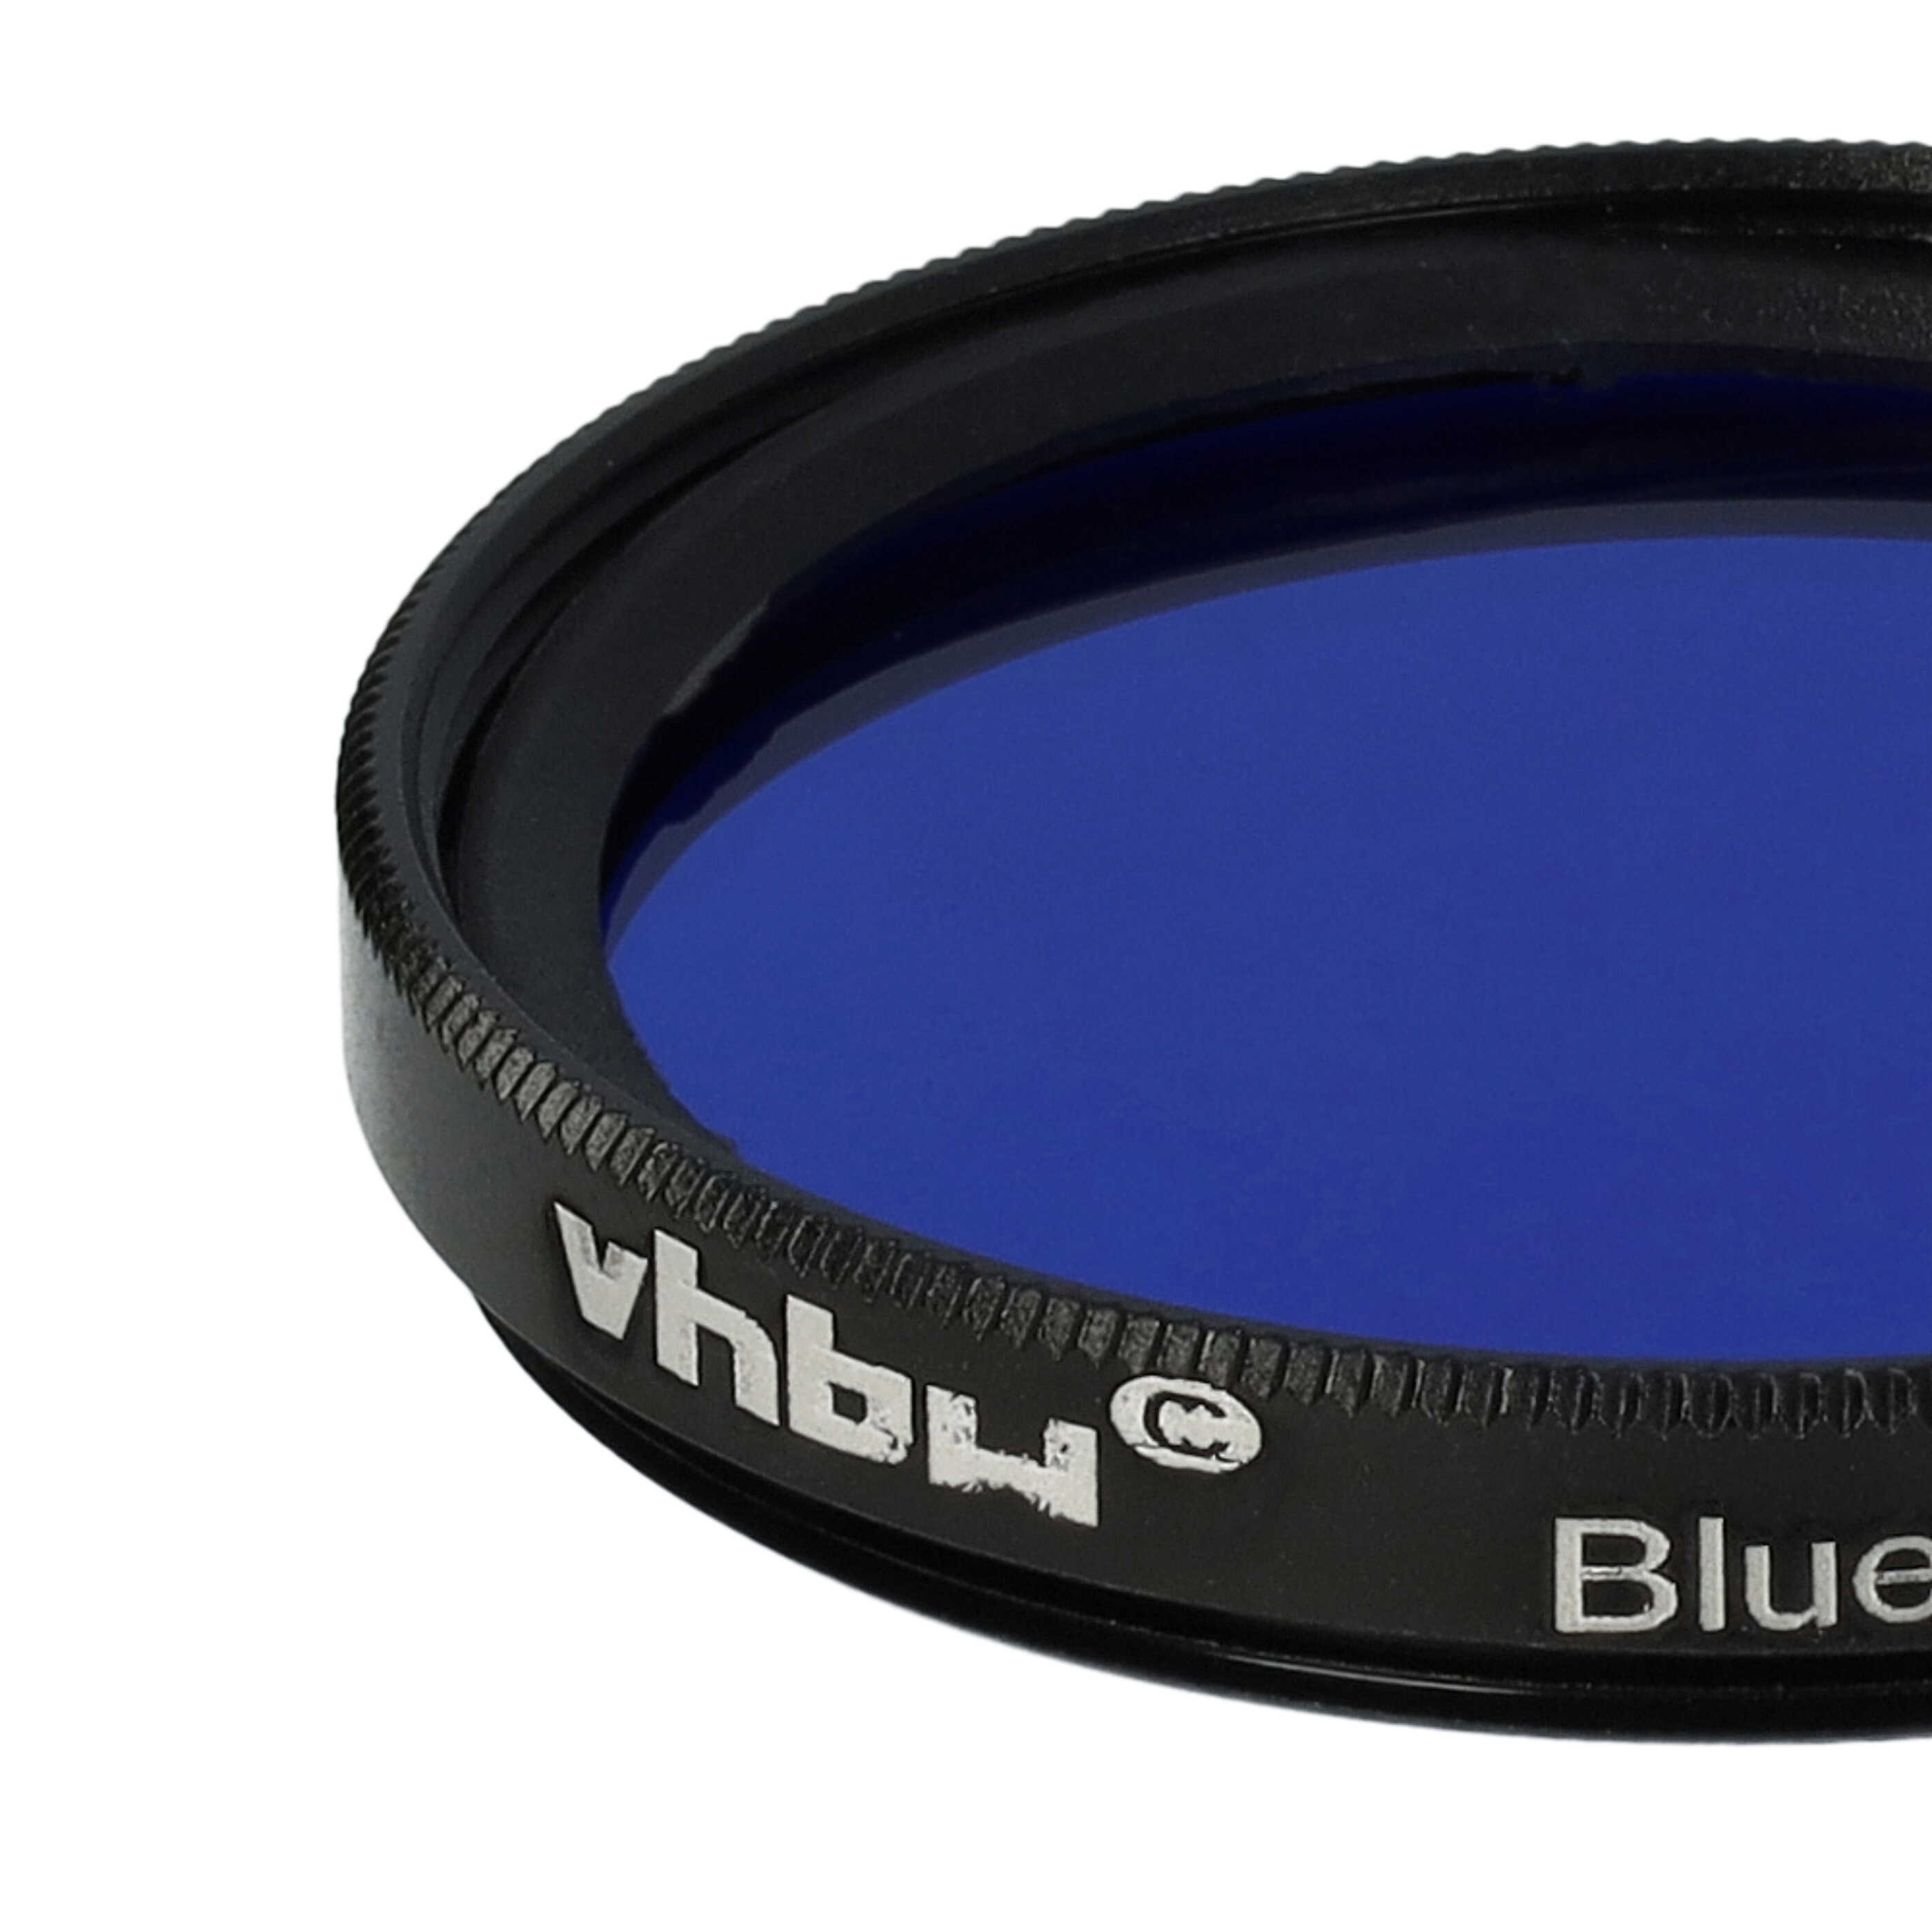 Coloured Filter, Blue suitable for Camera Lenses with 37 mm Filter Thread - Blue Filter